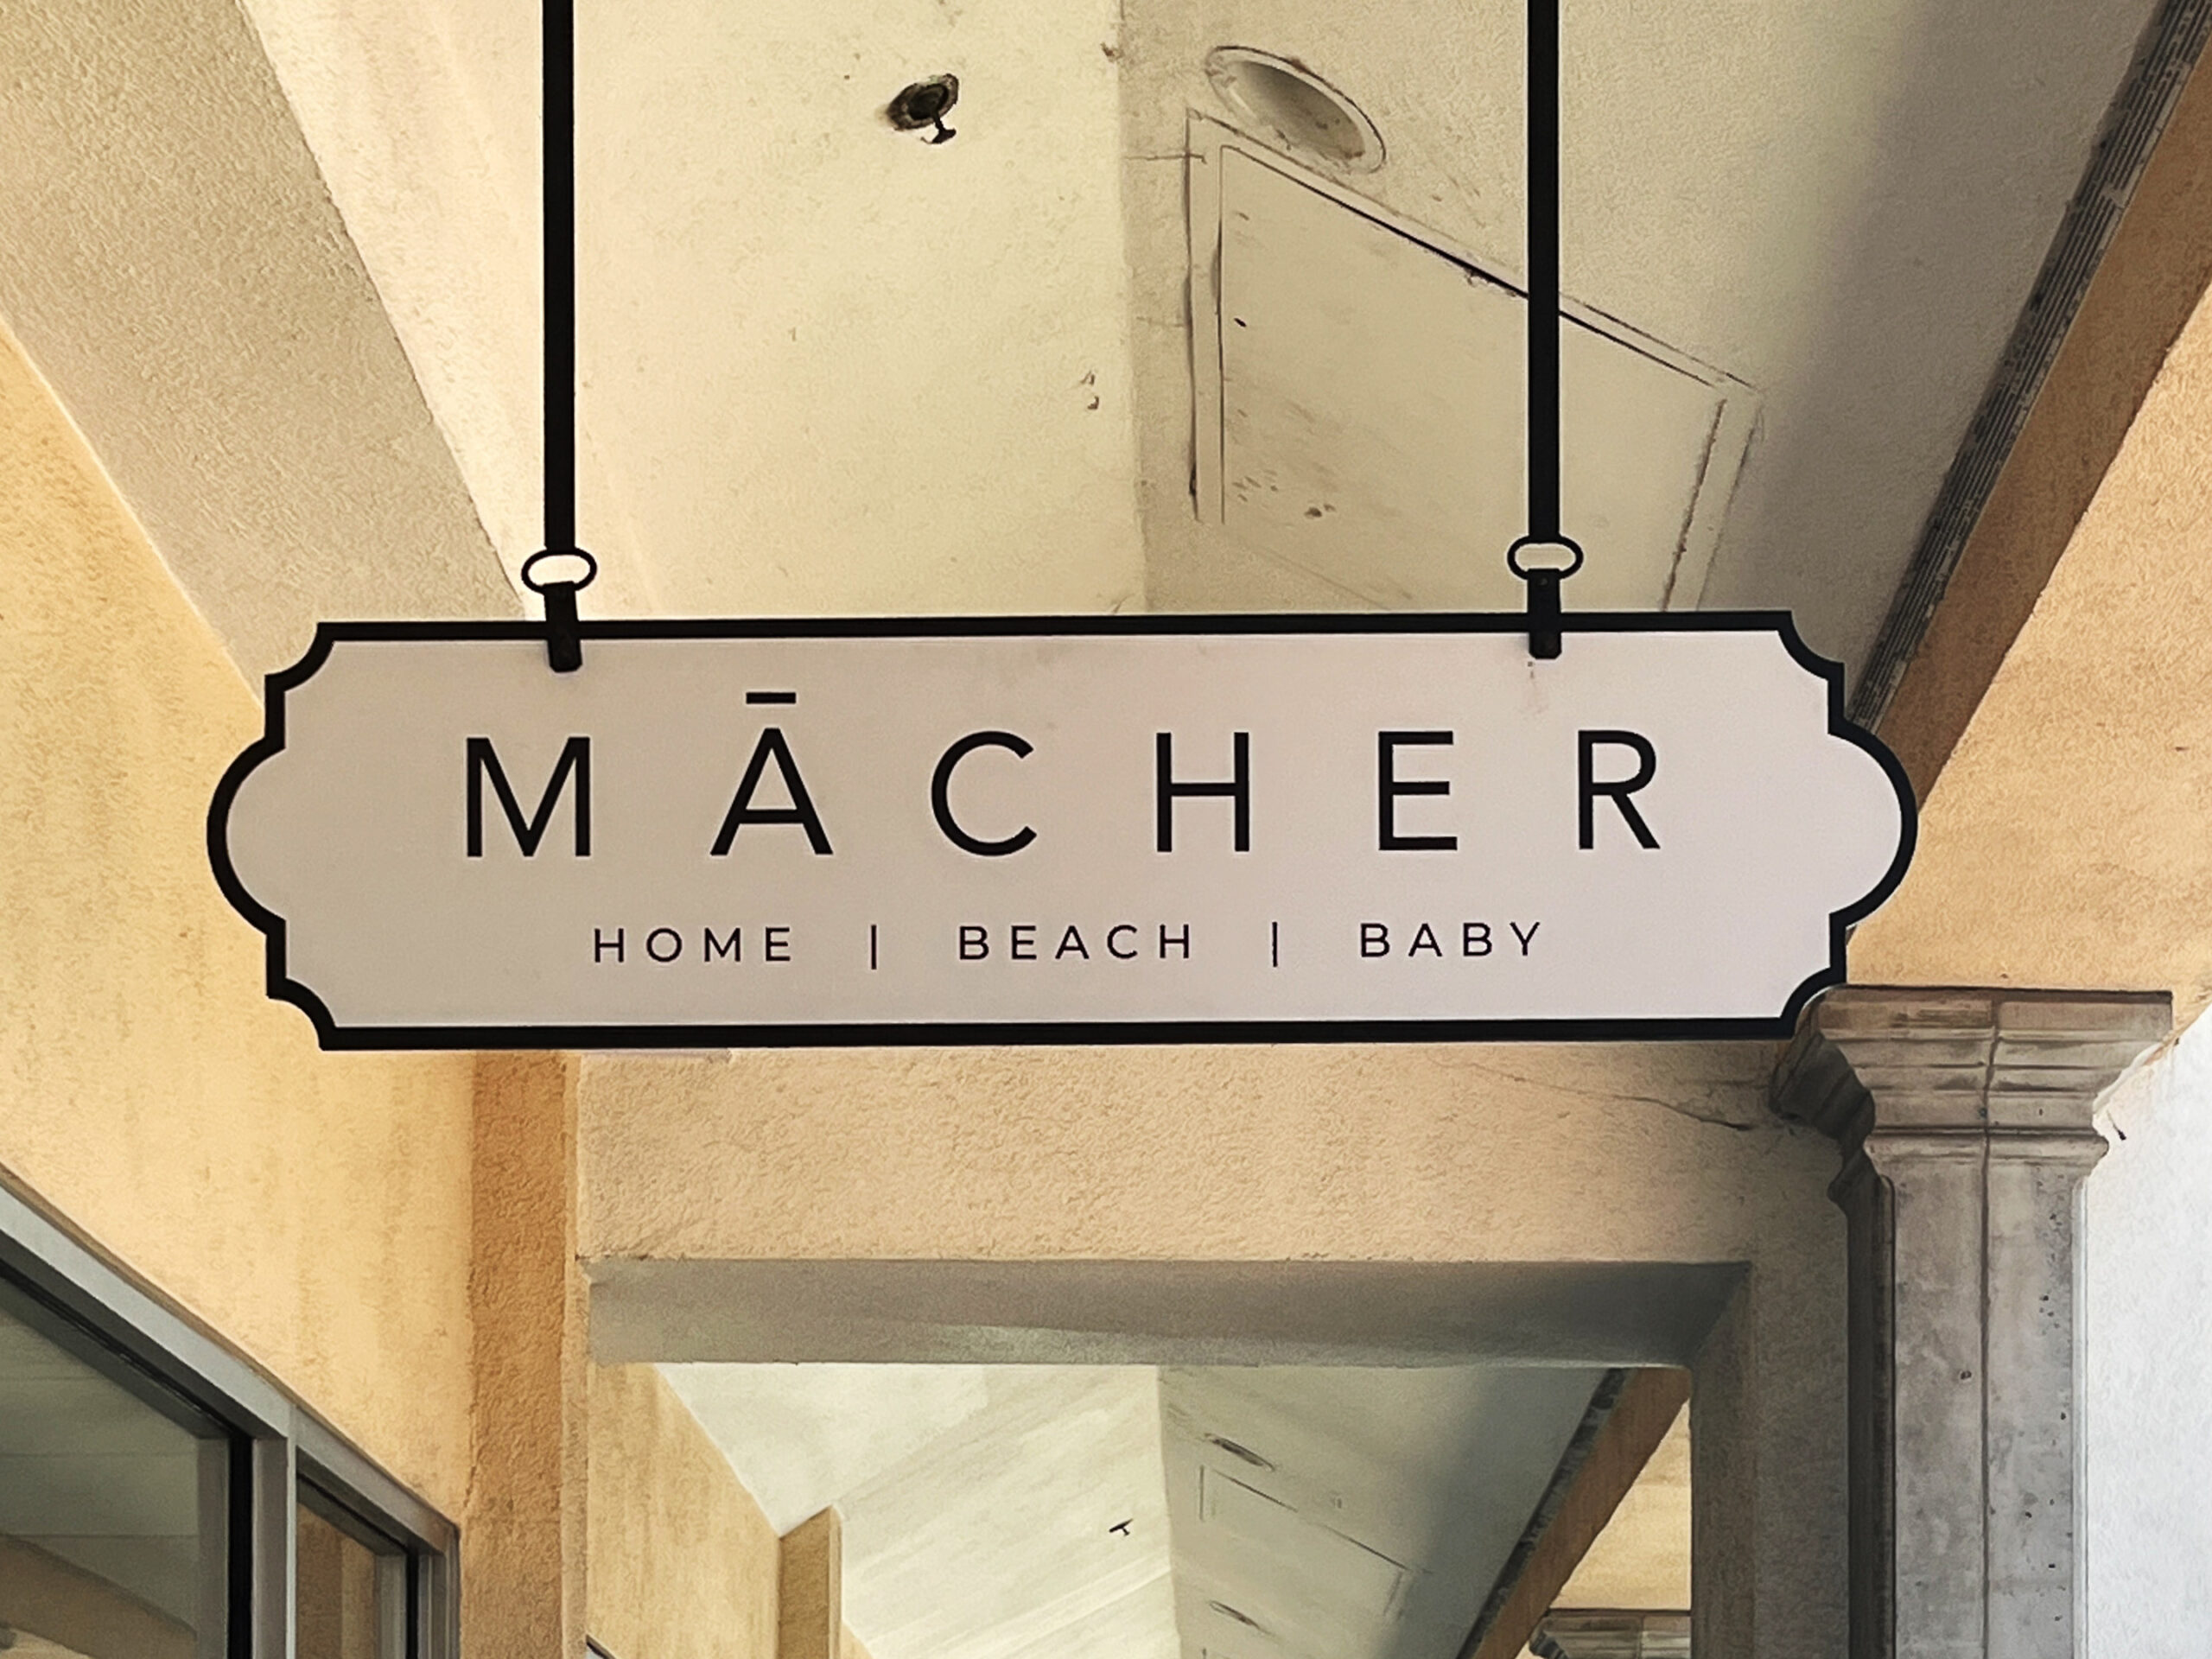 Mācher – Hanging signs are more commonly called blade signs and are great for shopping malls with high pedestrian traffic.